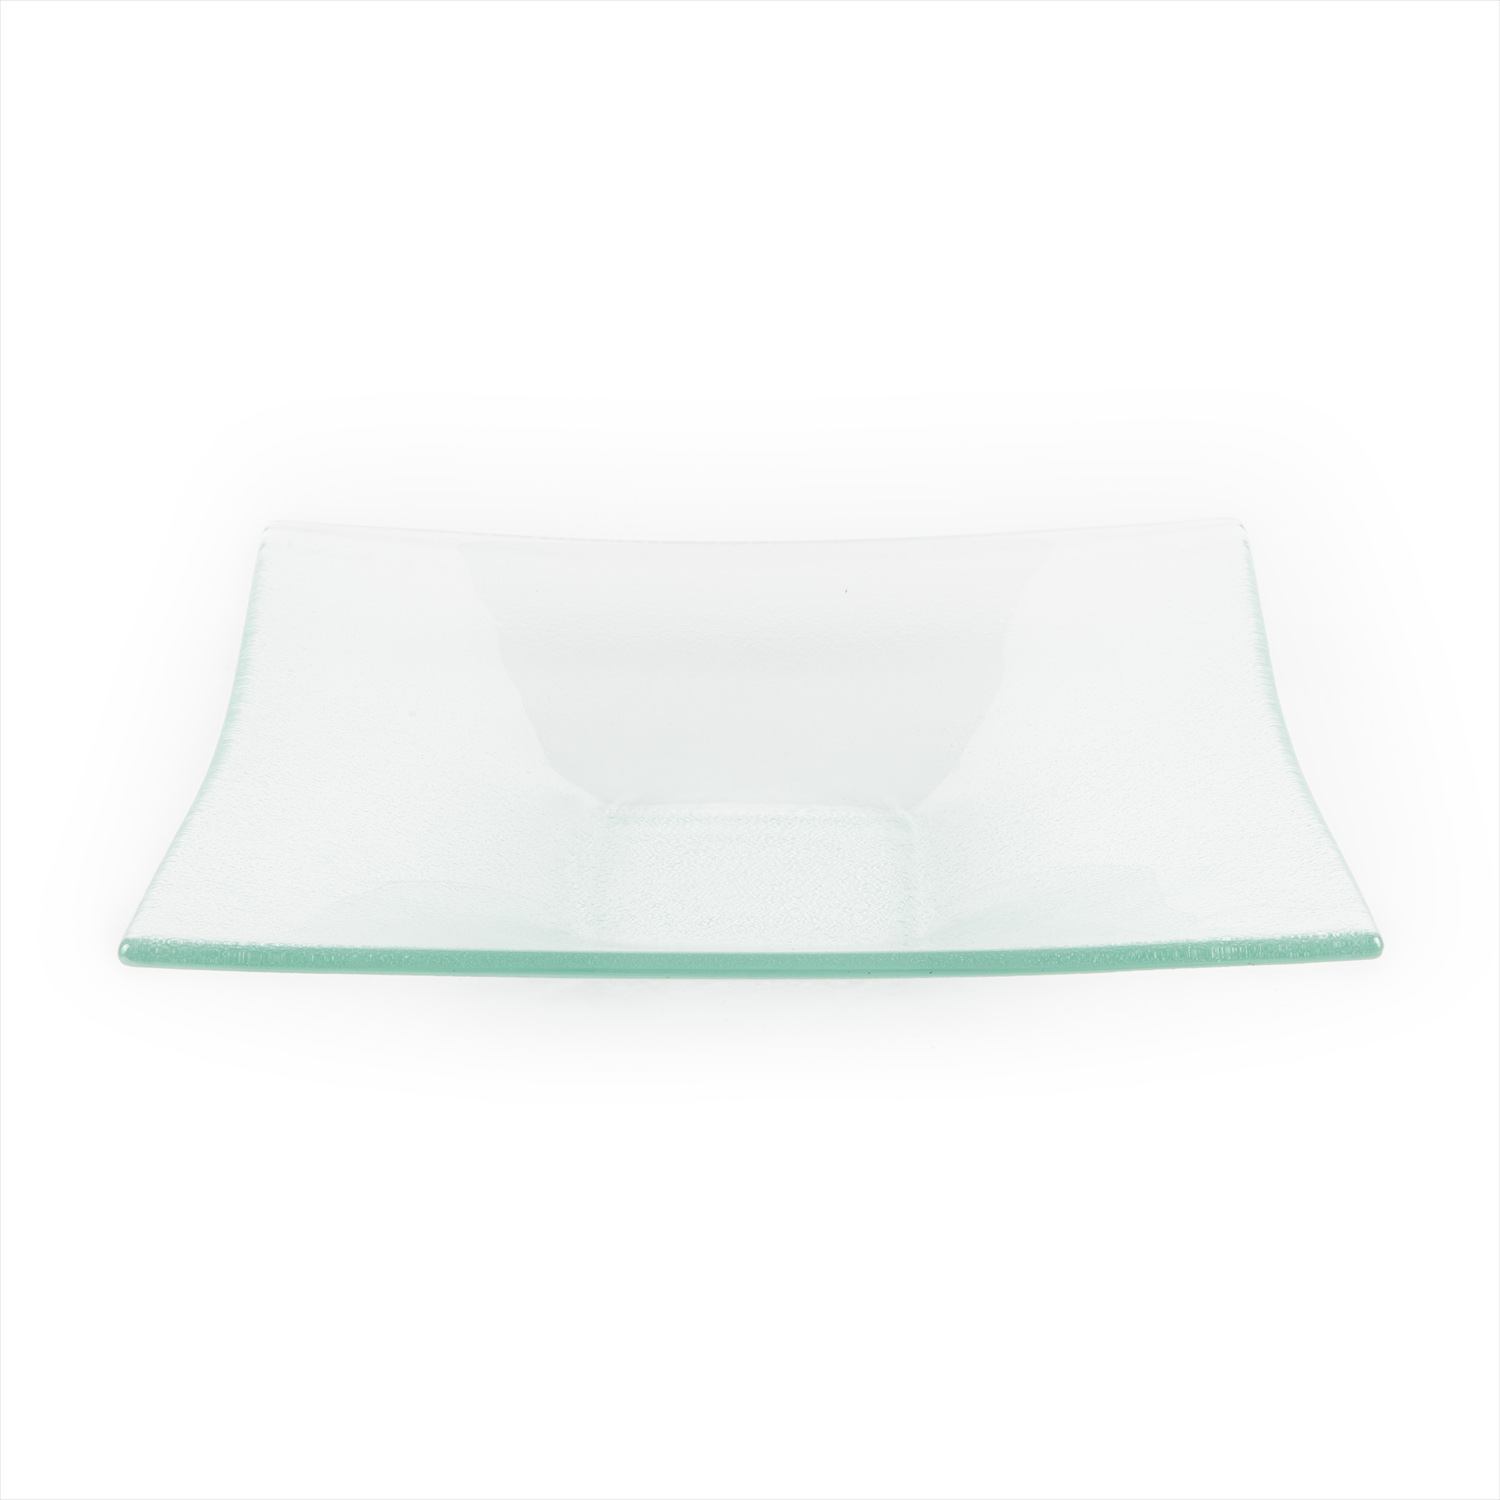 Fusion Glass Deep Plate Clear Square 10.5″ x 10.5″ x 1.5″  32 oz. CasePack:6